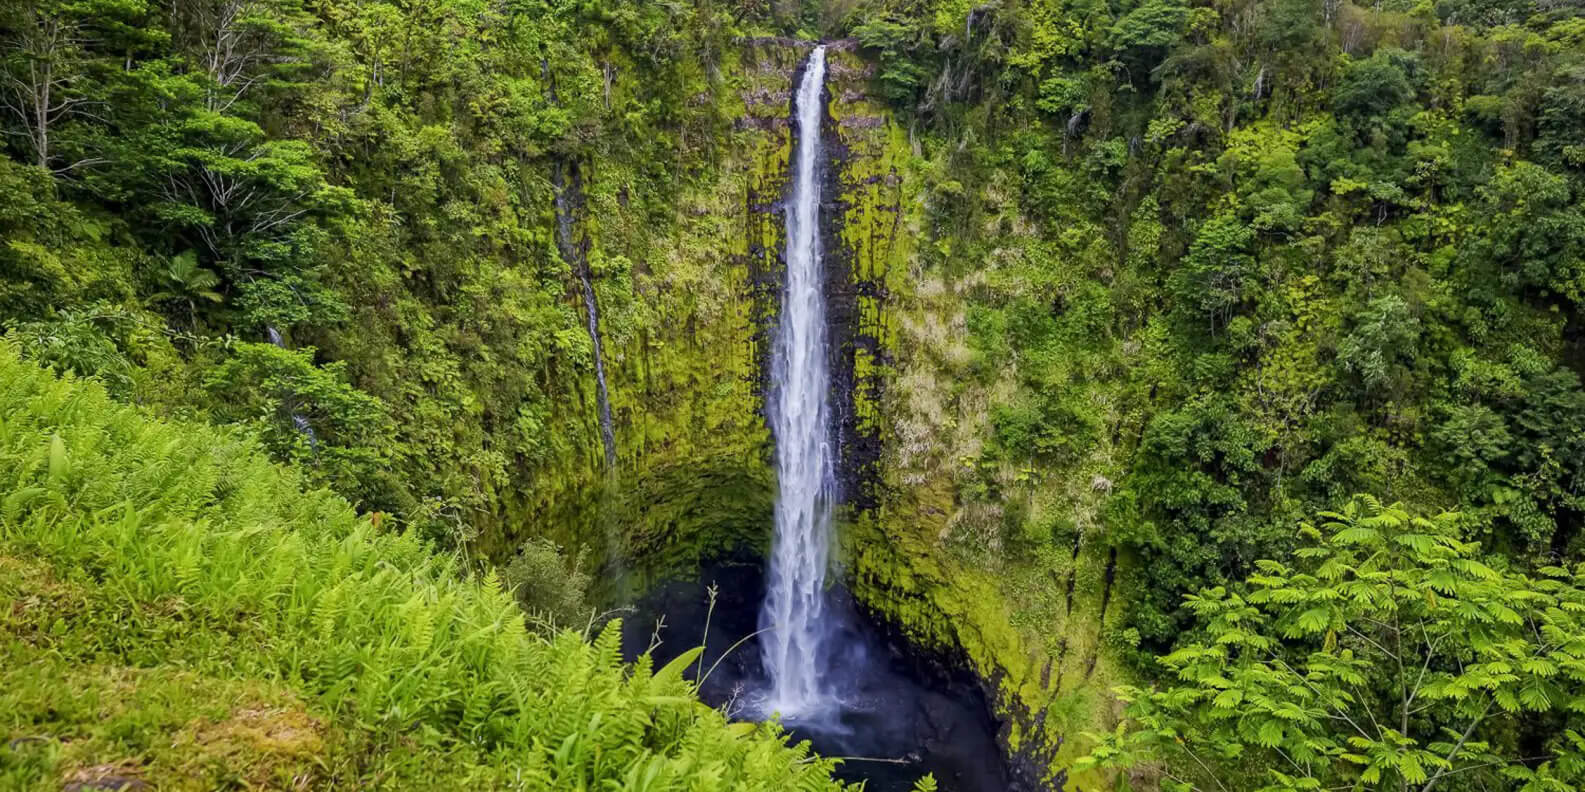 Experience the exclusive Hawaii as a tall waterfall cascades into a circular pool surrounded by lush, green vegetation and dense forest.